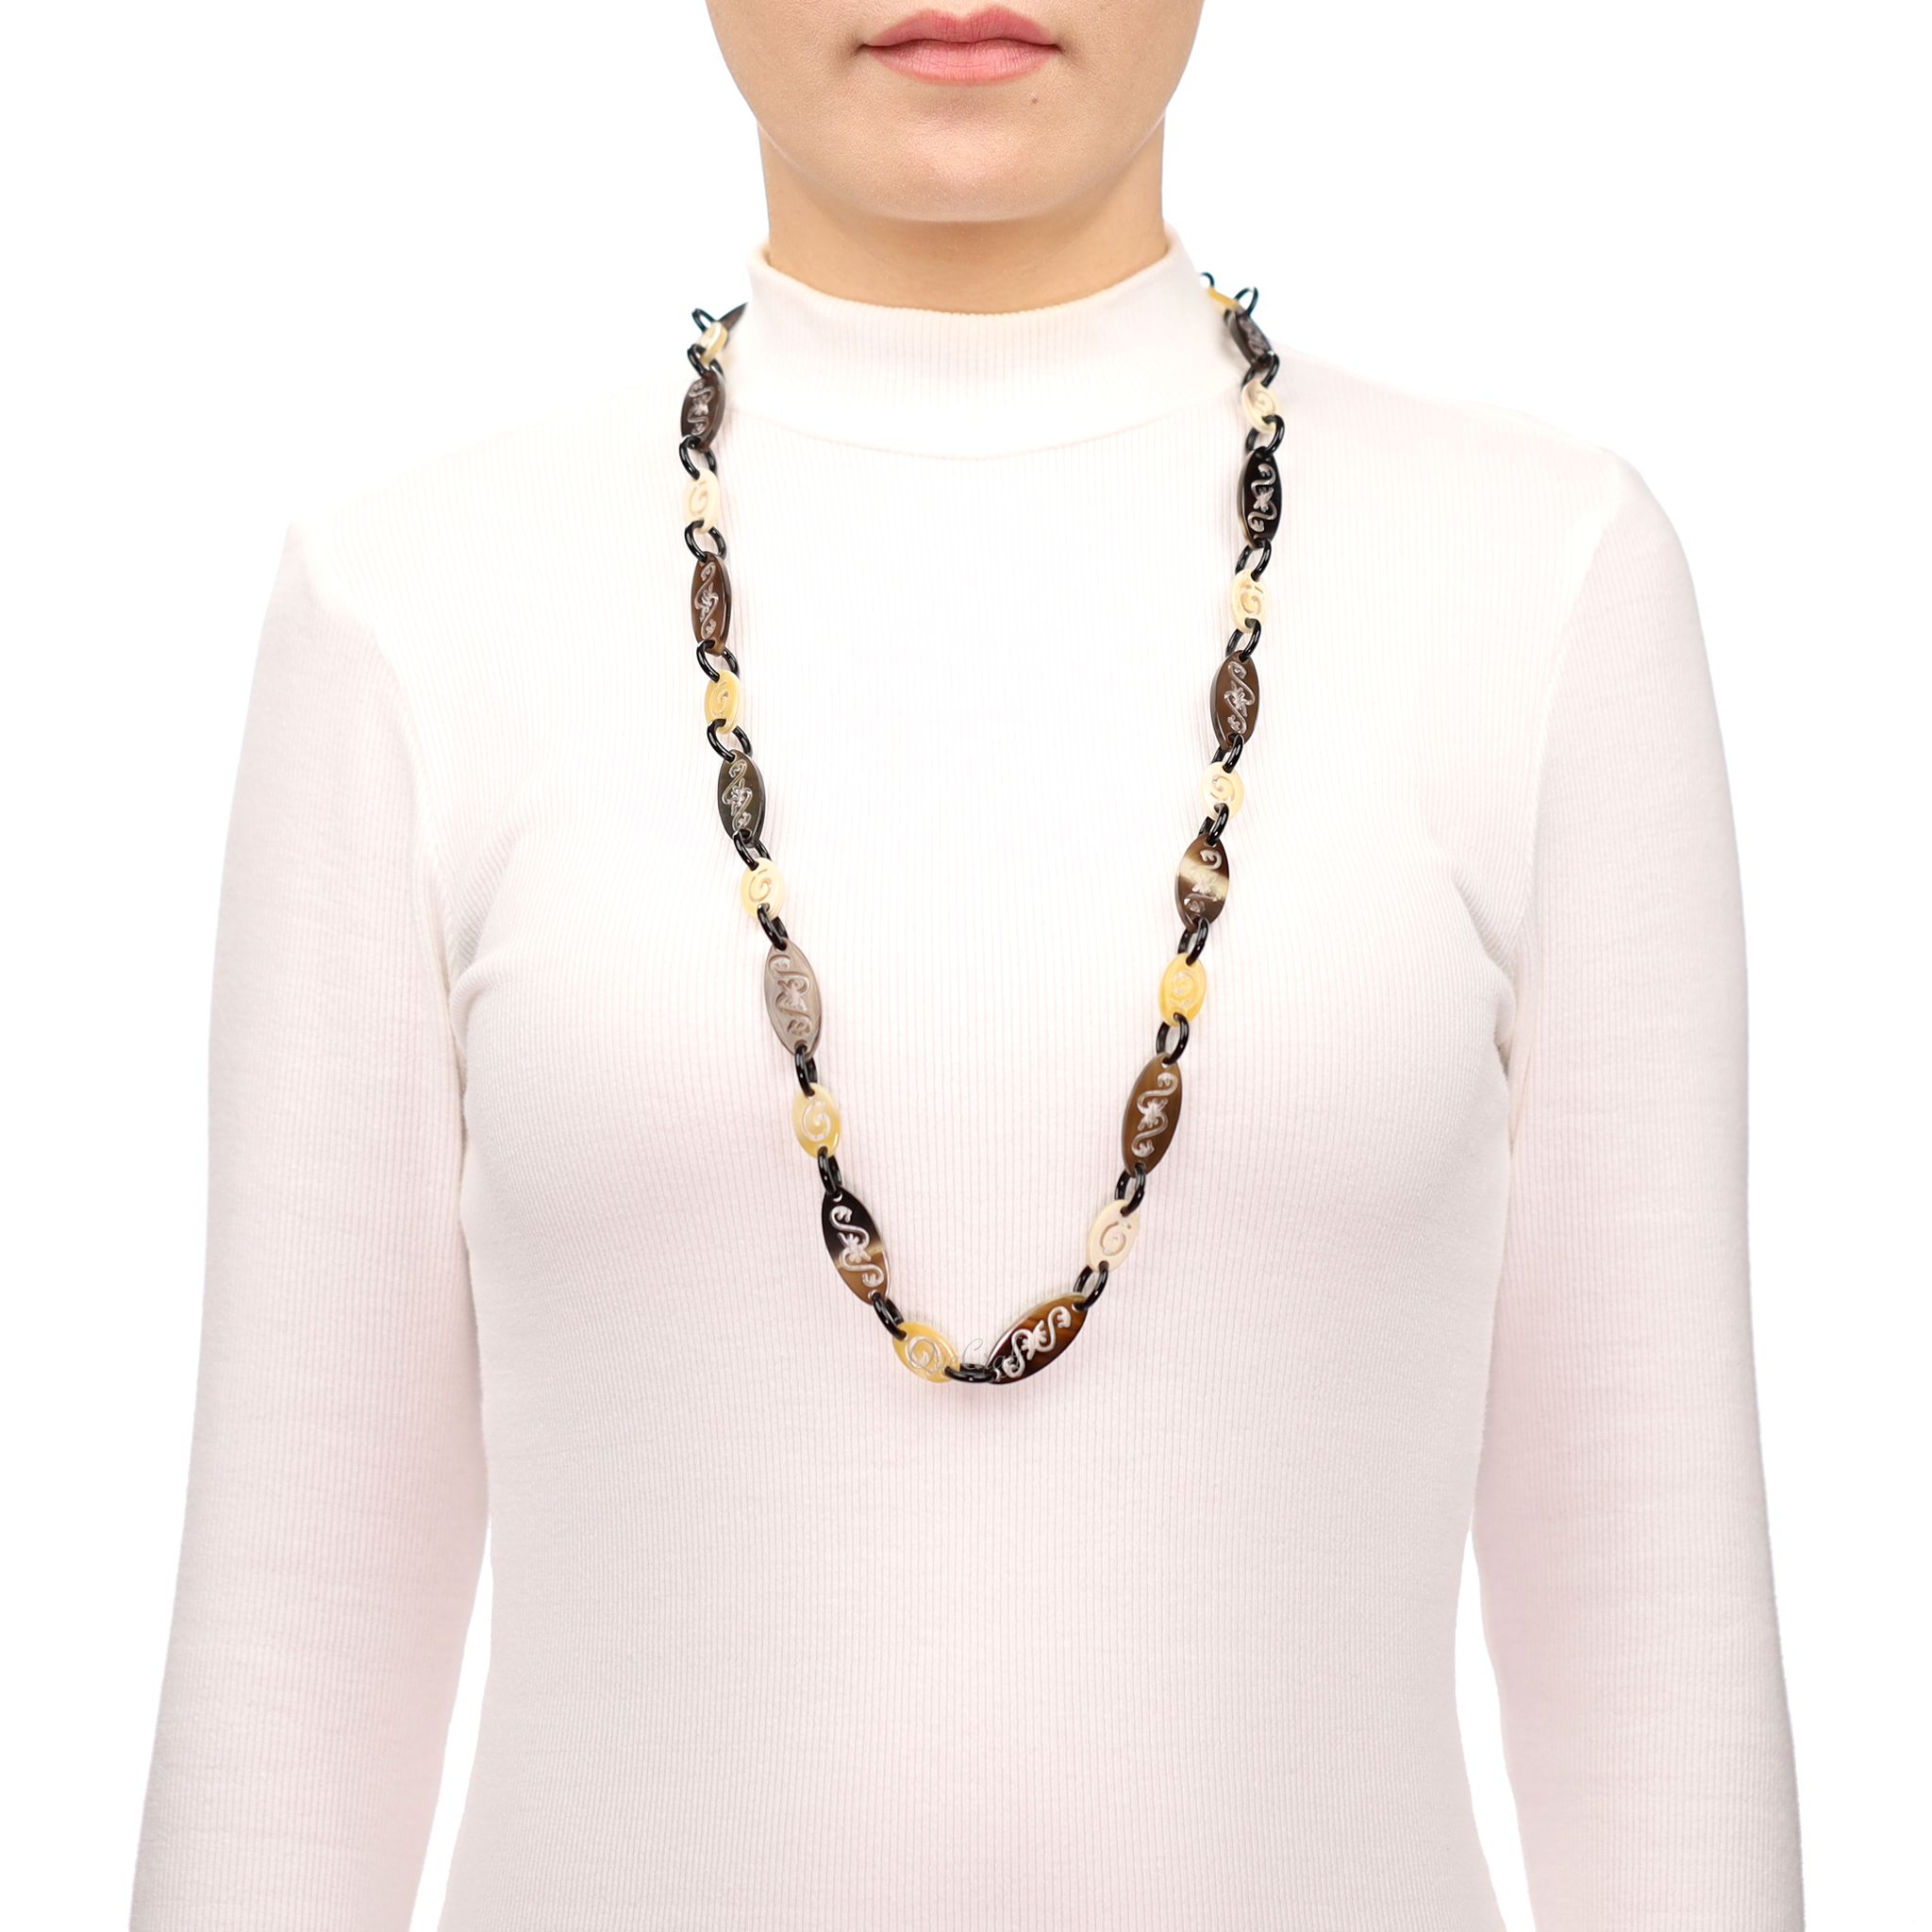 Horn Chain Necklace #13671 - HORN JEWELRY